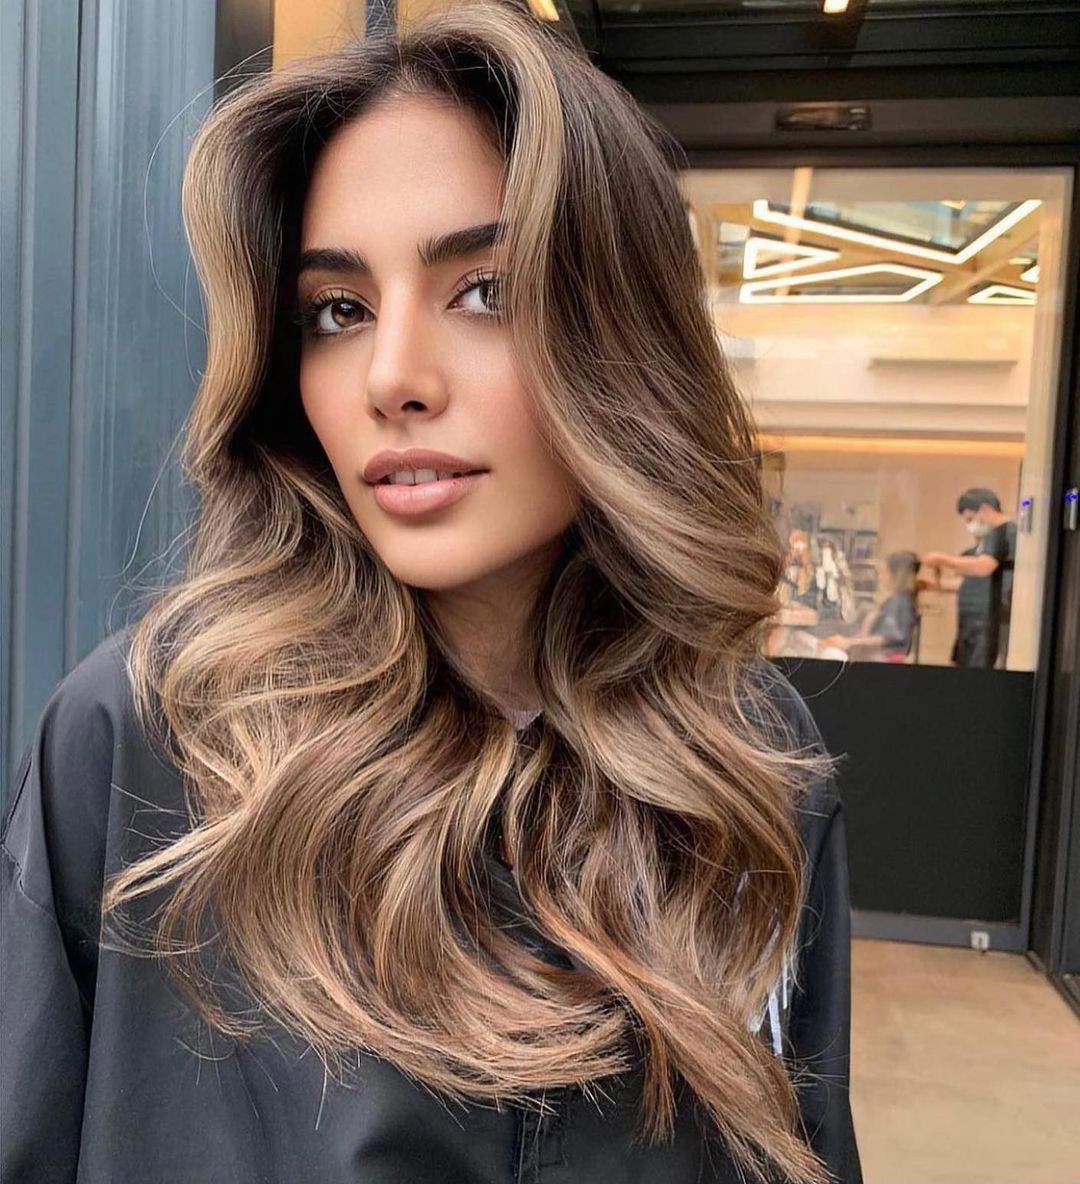 100+ Trendy Hairstyle Ideas For Women To Try In 2021 images 21